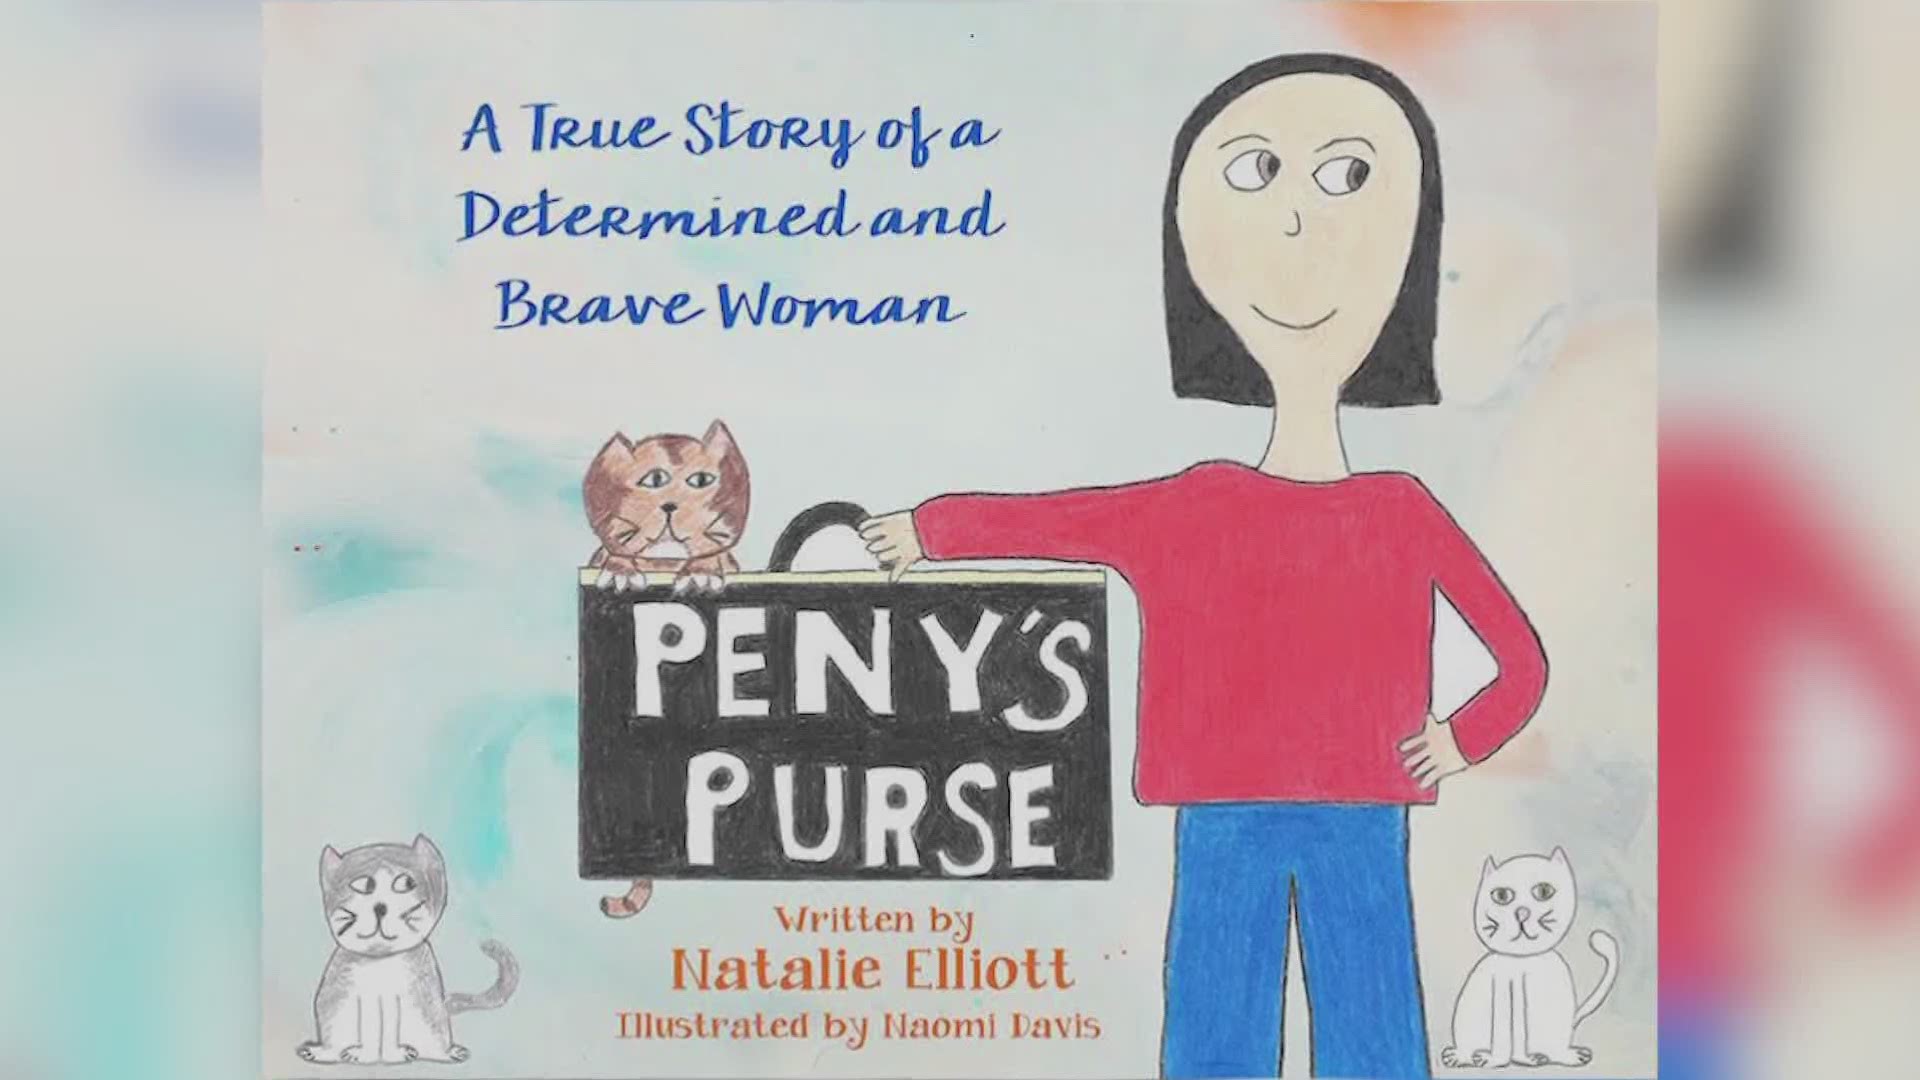 Fourth grade Waukee teacher Natalie Elliott teamed up with a student to write and illustrate "Peny's Purse" during the pandemic. It's on sale starting Oct. 1, 2020.